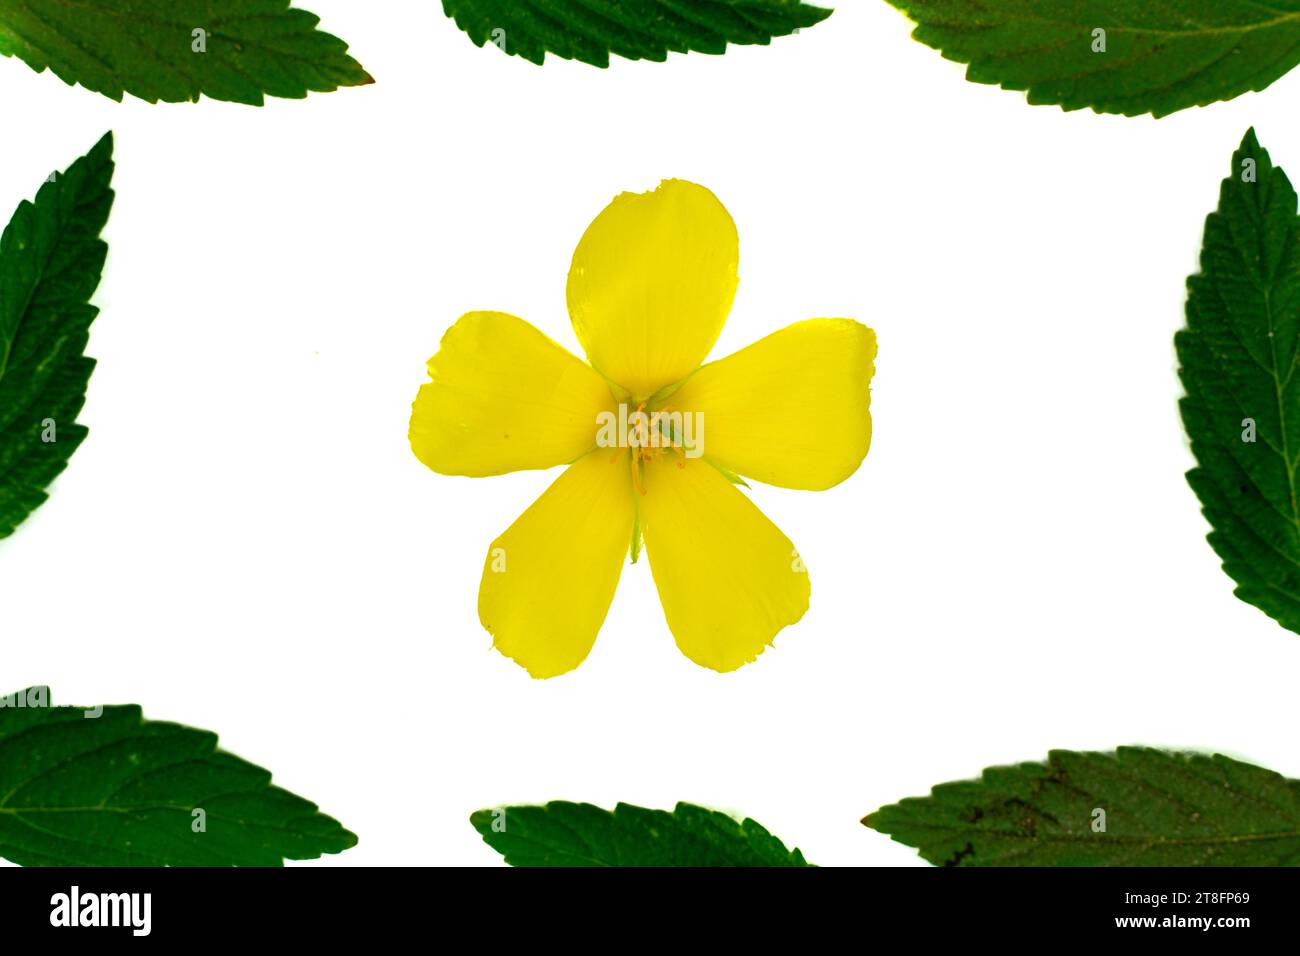 Damiana or Turnera diffusa flowers with leaf frame on white background Stock Photo